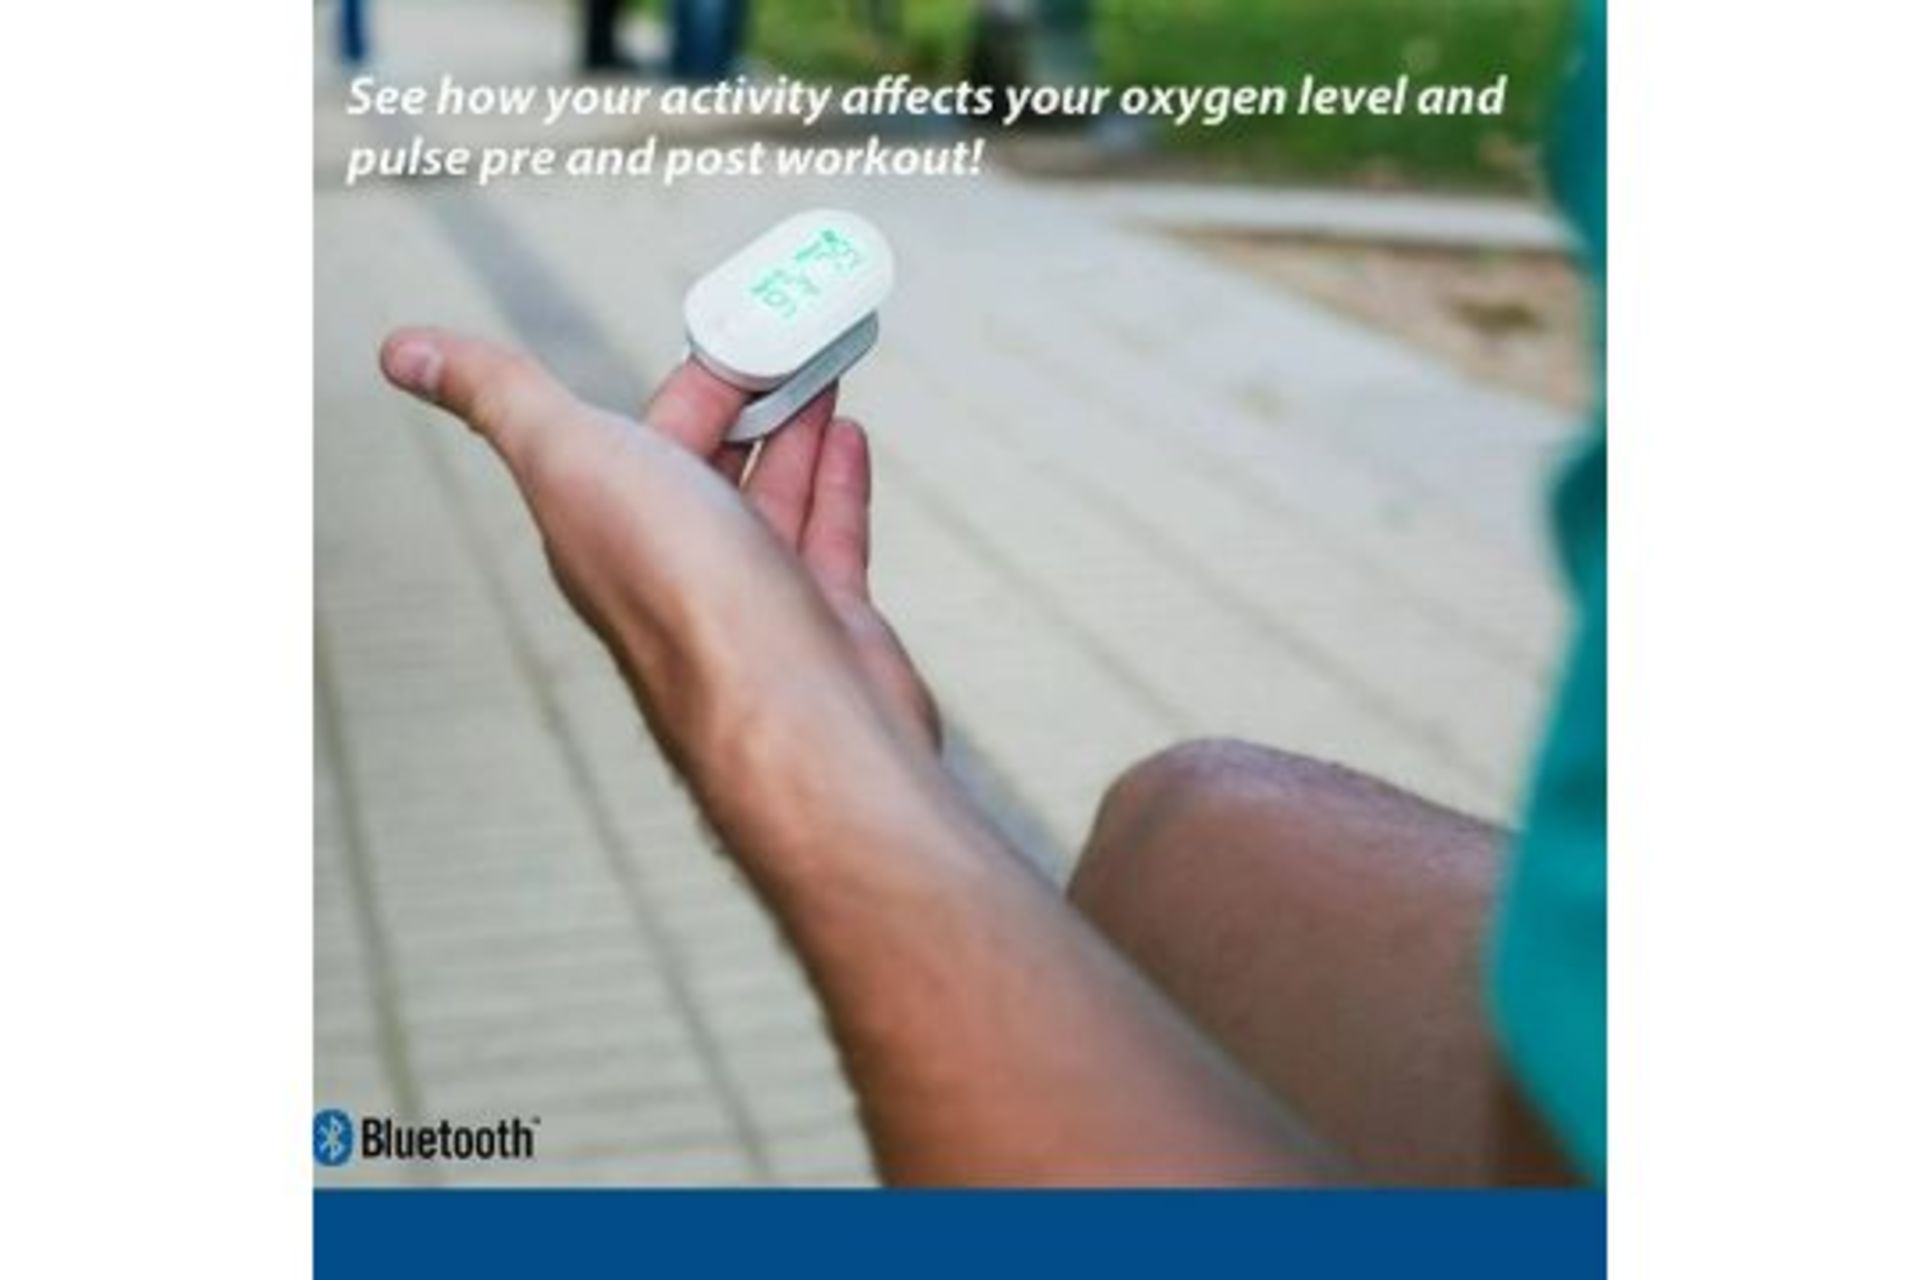 NEW & BOXED iHealth Air Pulse Oximeter. Accurately measure your blood oxygen level, pulse rate, - Image 6 of 6